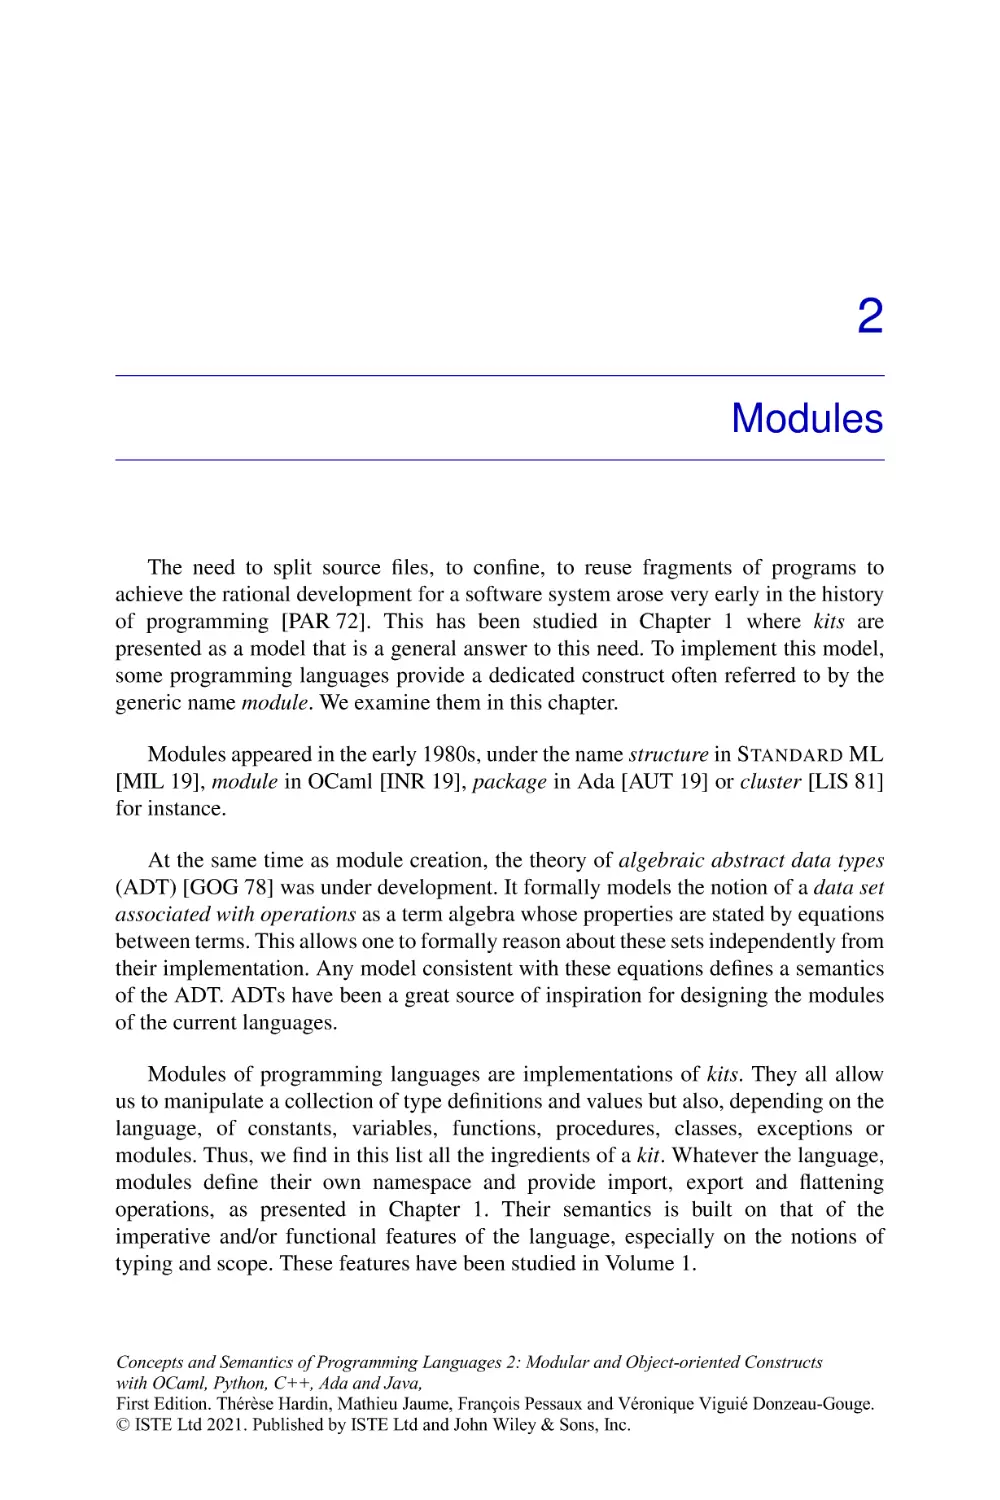 Chapter 2. Modules